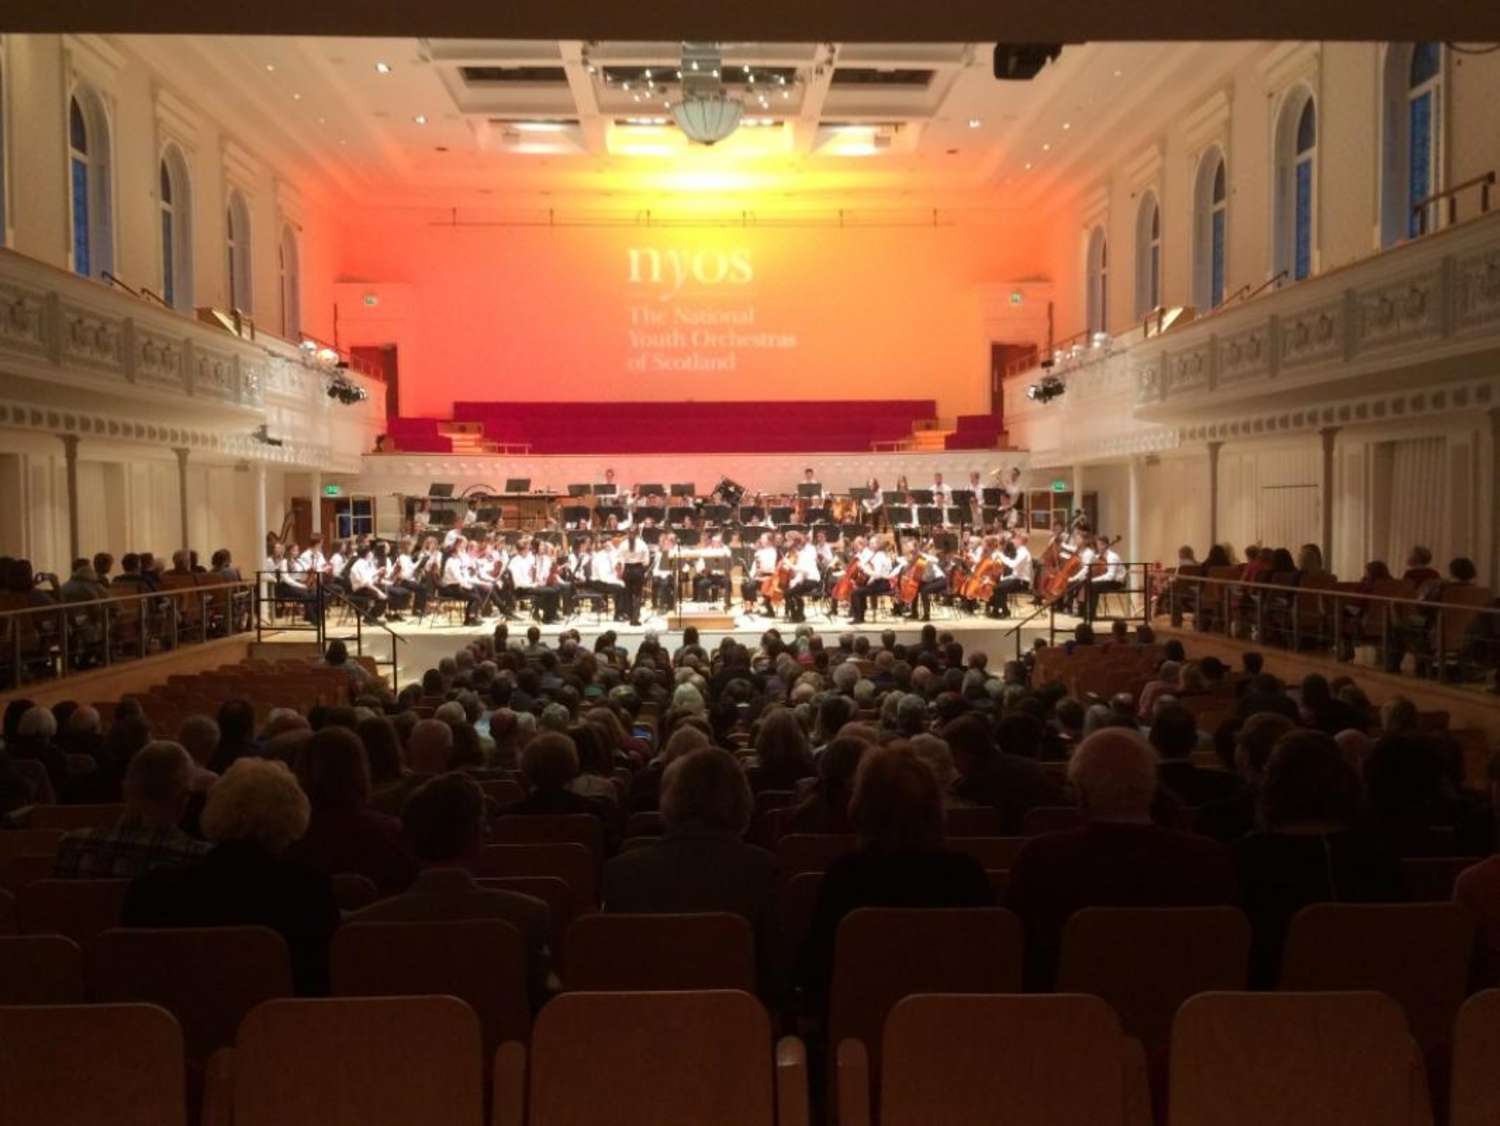 NYOS Senior Orchestra on stage, complete with new branded gobo above at Glasgow's City Halls, April 2017